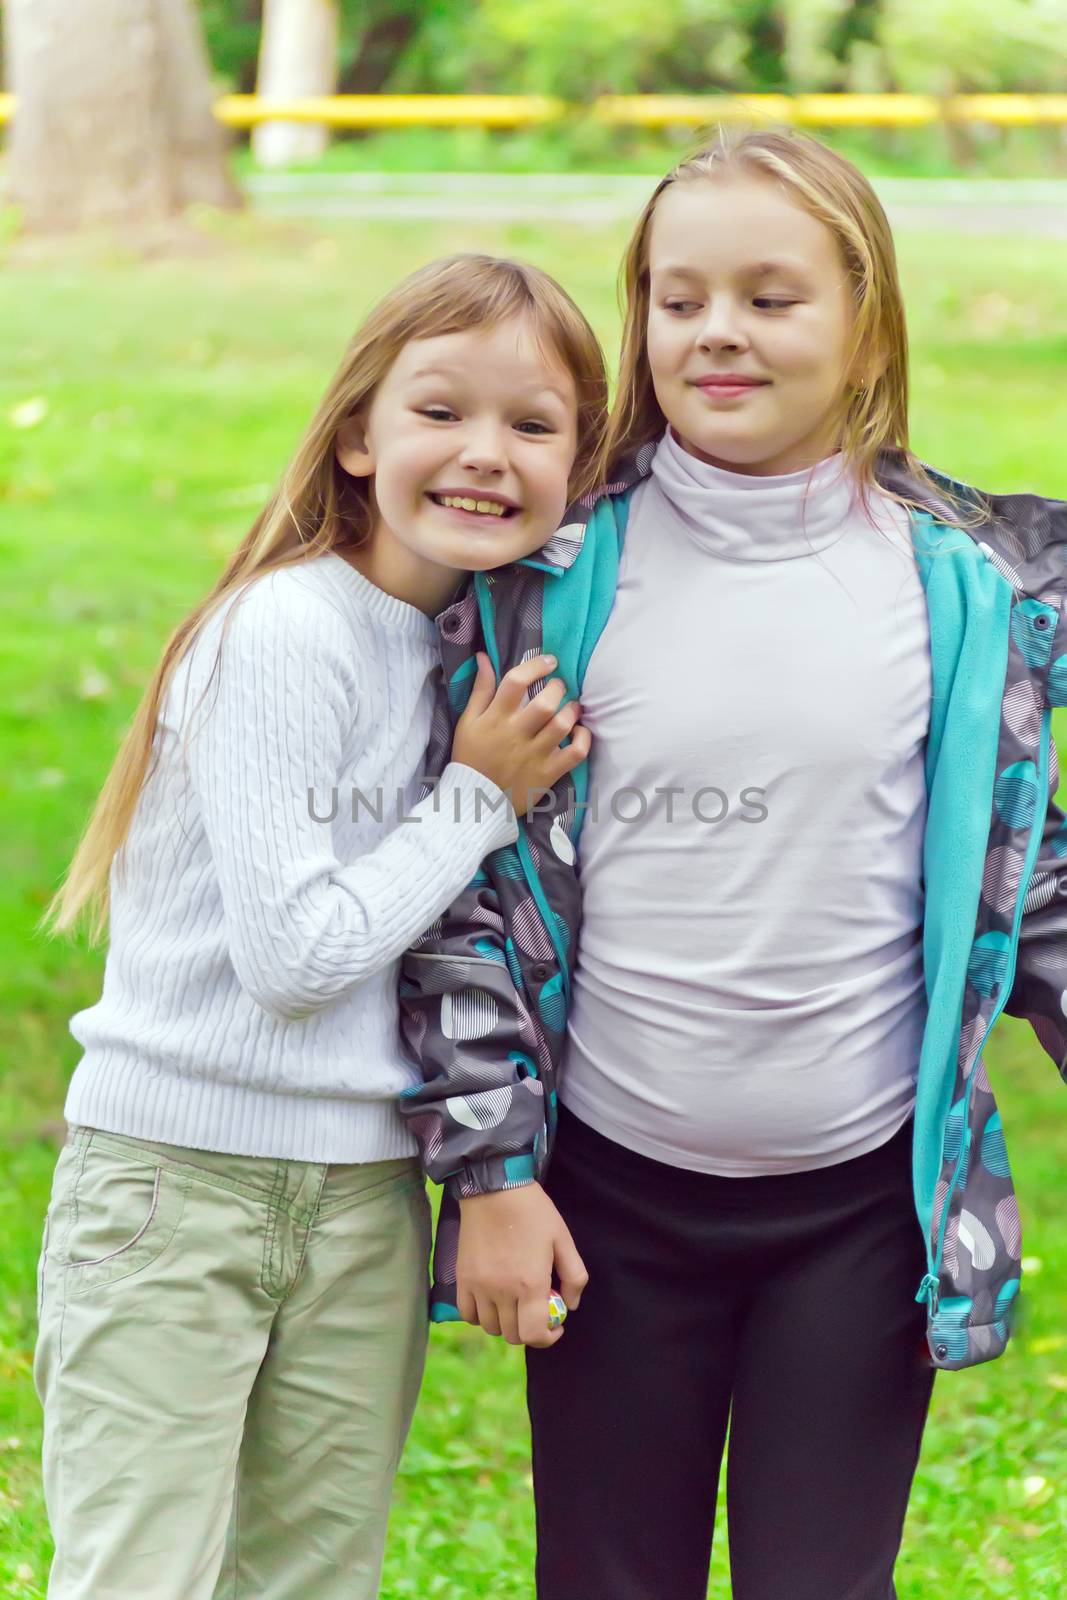 Photo of two playing girls in summer